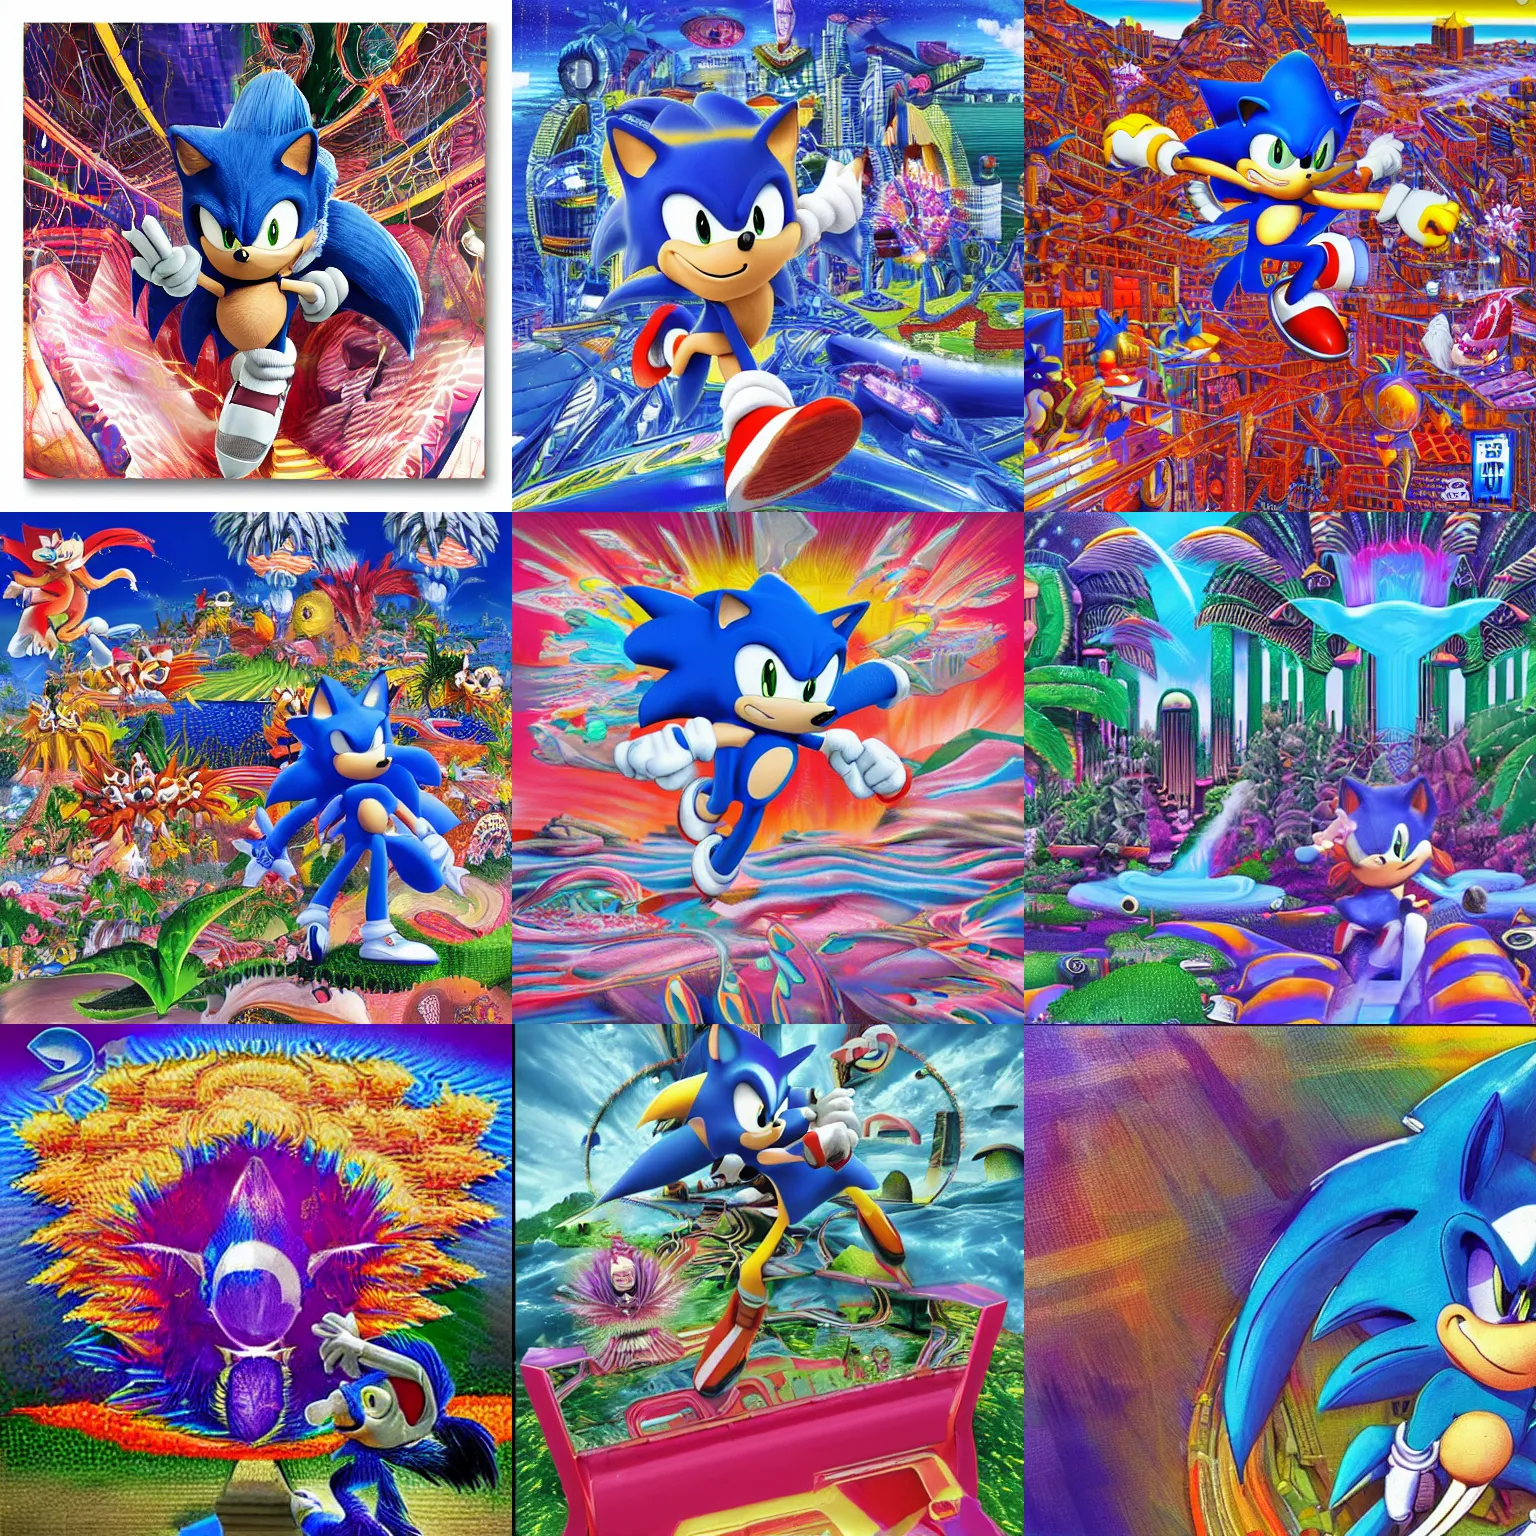 Prompt: sonic the hedgehog in a surreal, softa, detailed professional, high quality airbrush art mgmt shpongle album cover of a chrome dissolving LSD DMT blue sonic the hedgehog surfing through vaporwave cyberspace, checkerboard horizon , 1990s 1992 Sega Genesis video game album cover